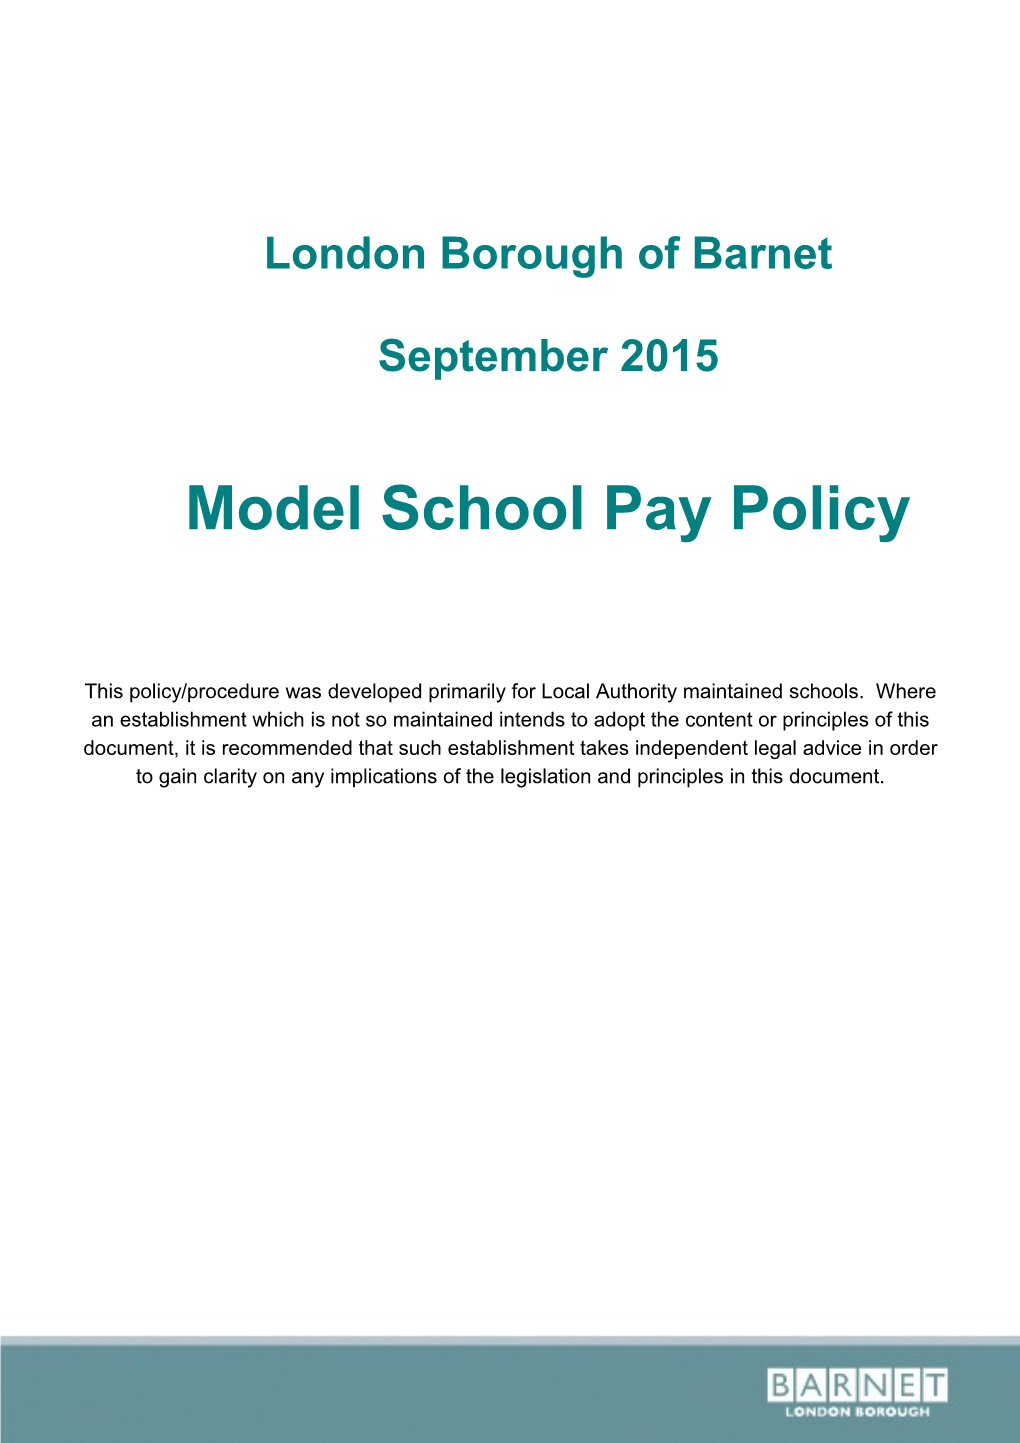 Model School Pay Policy